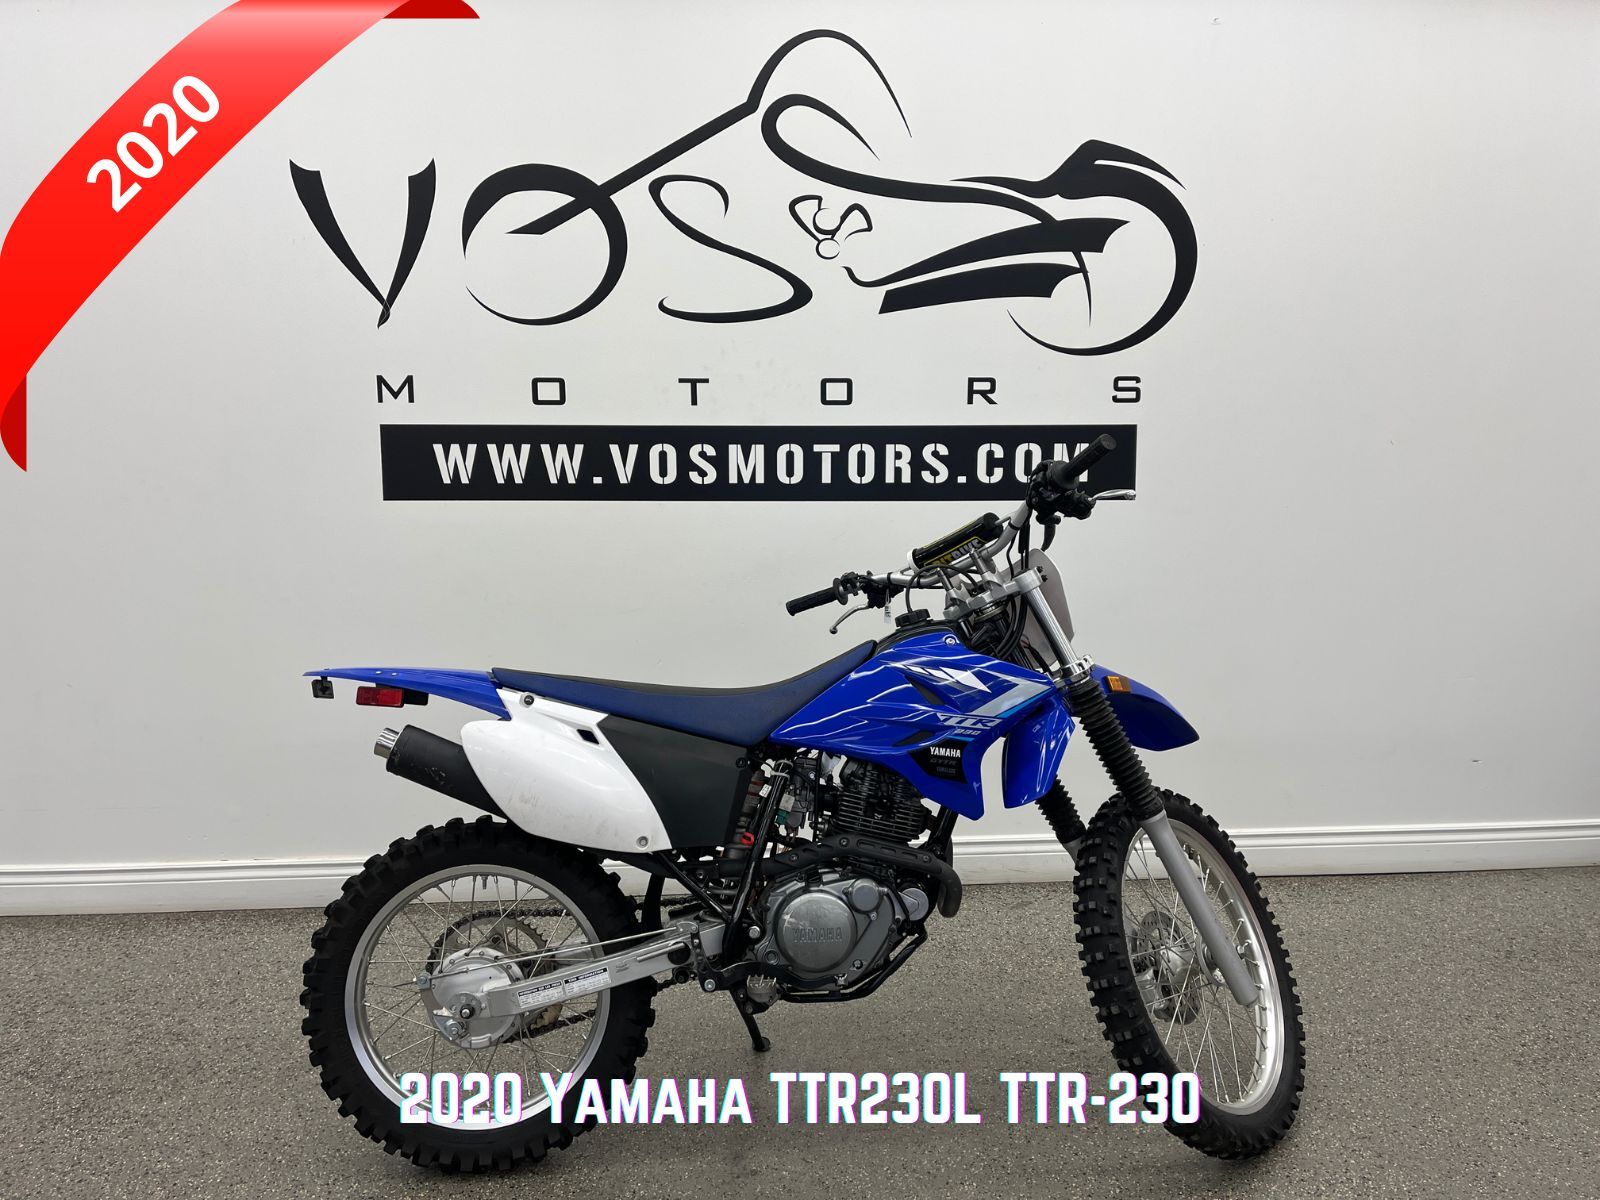 2020 Yamaha TTR230L TTR-230 - v5800 - -No Payments for 1 Year**